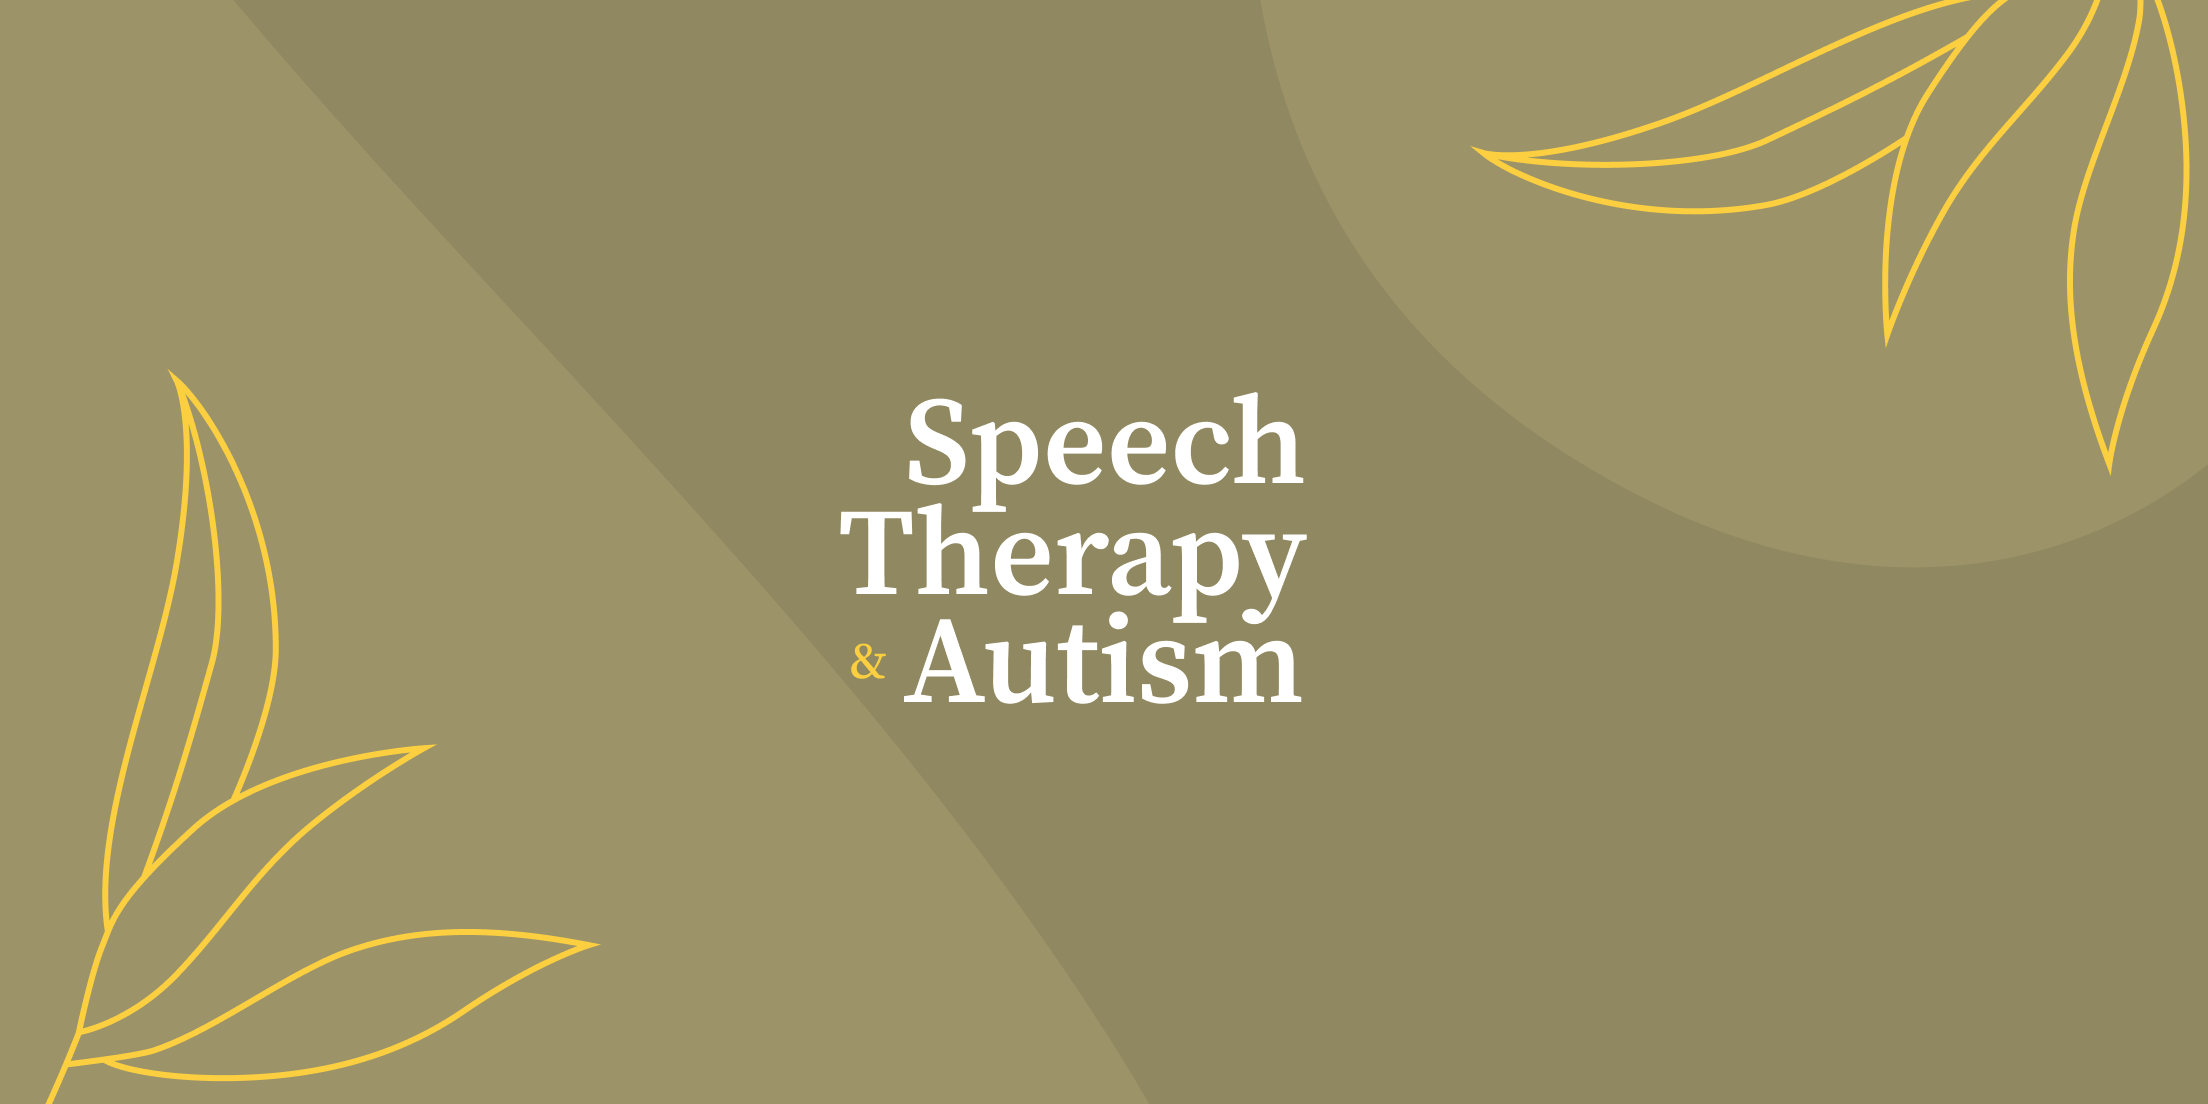 Guide: Speech Therapy & Autism: How Much Will It Help?